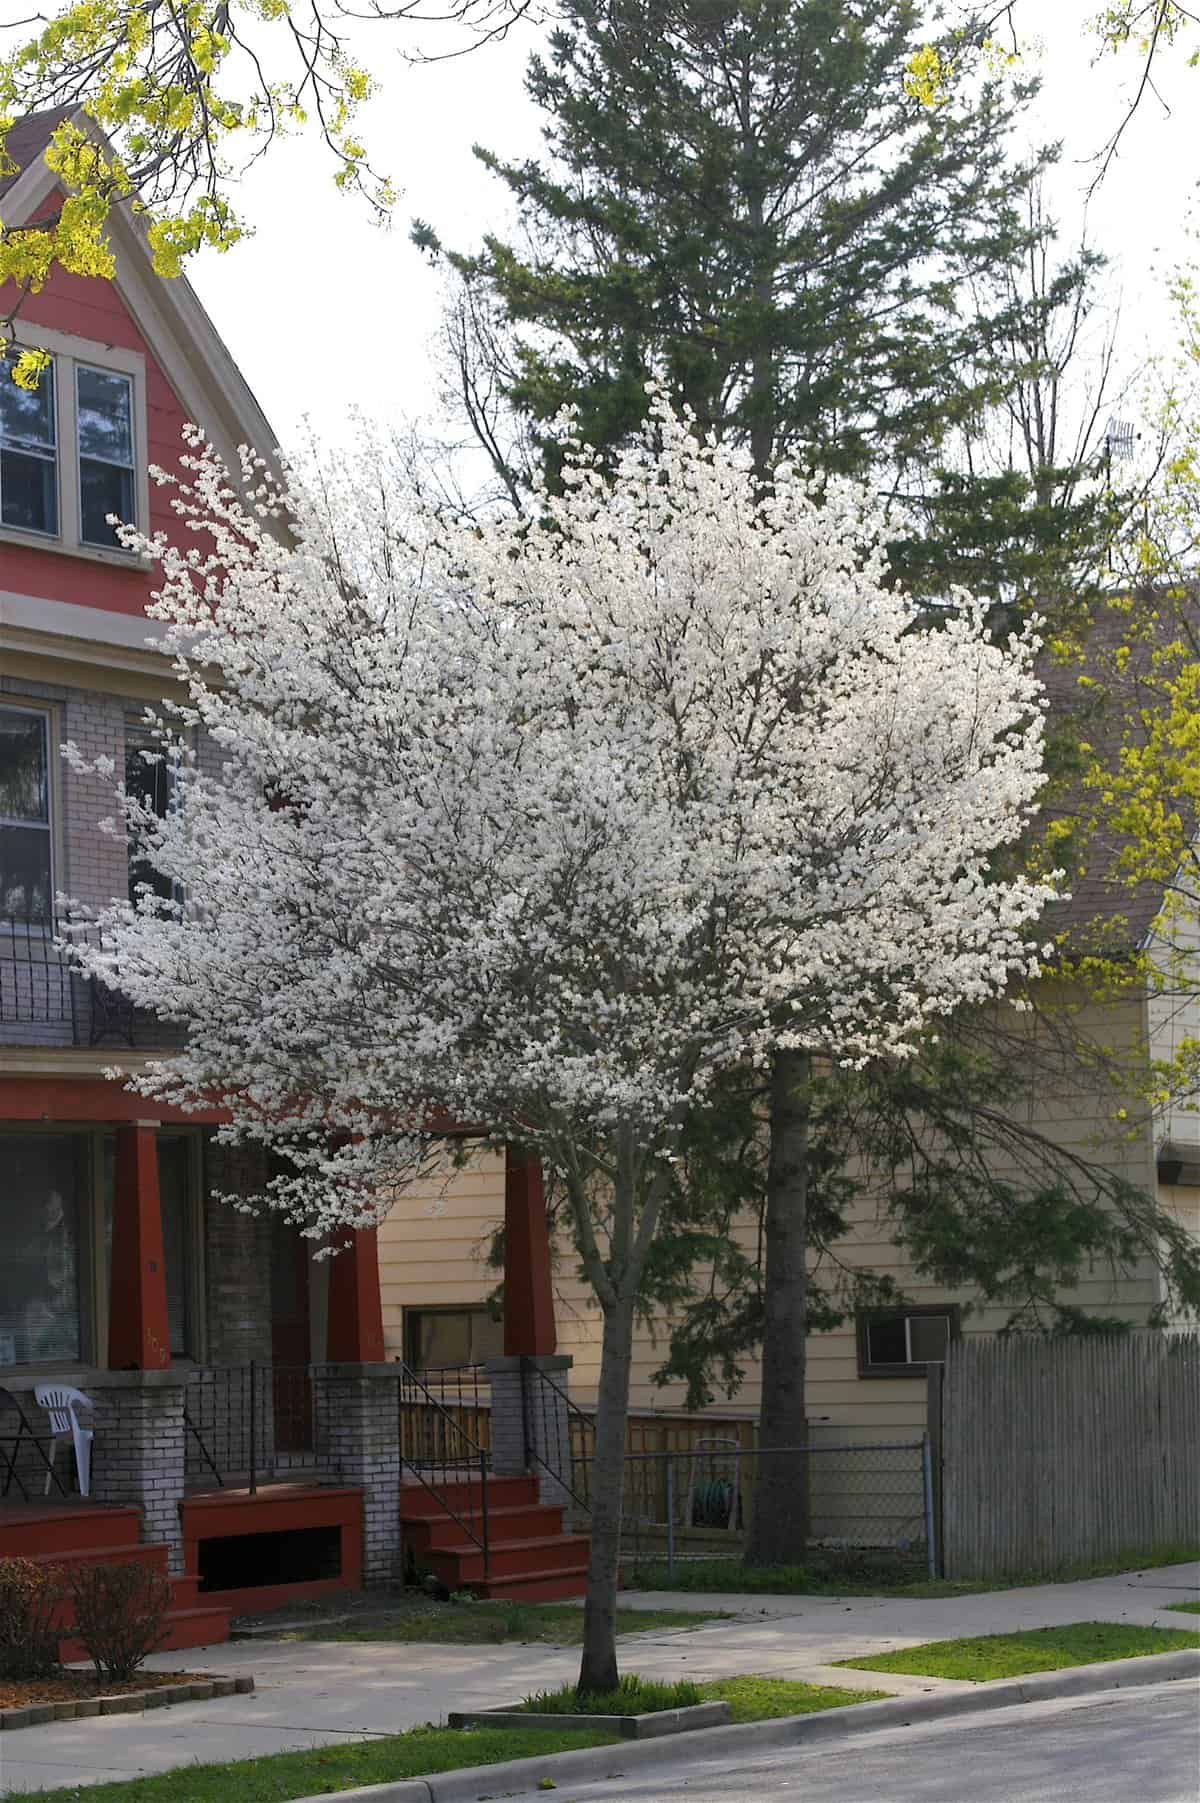 A white flowering allegheny serviceberry tree in front of a house.